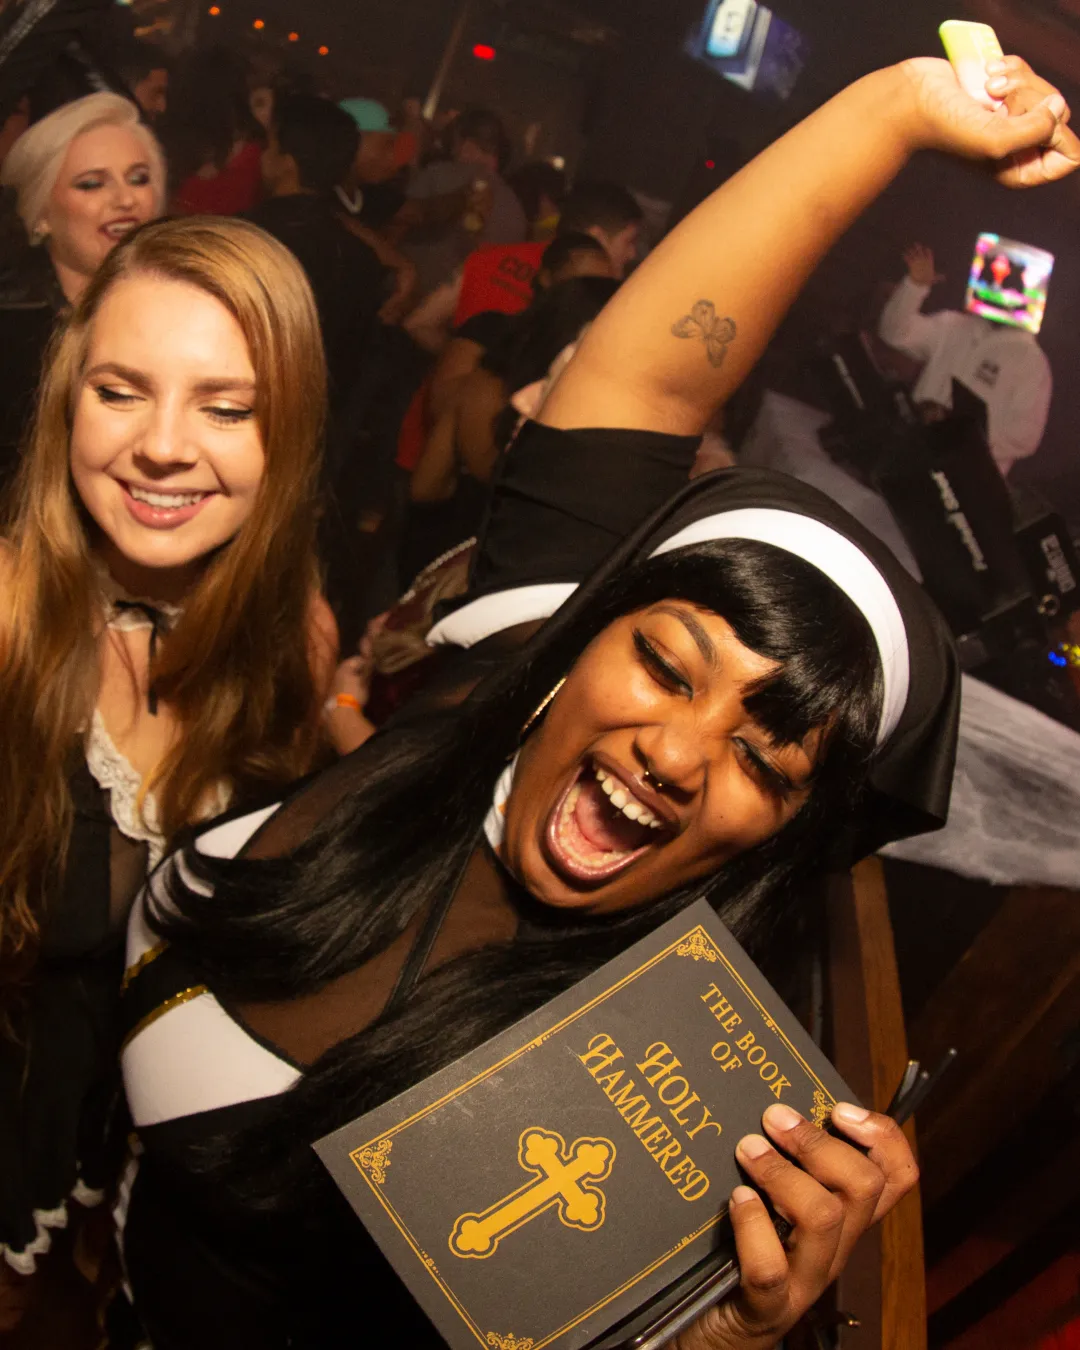 Amid the haunting melodies, a comical nun is found dancing in desguise amongst a group of friends at the Halloween bar crawl
